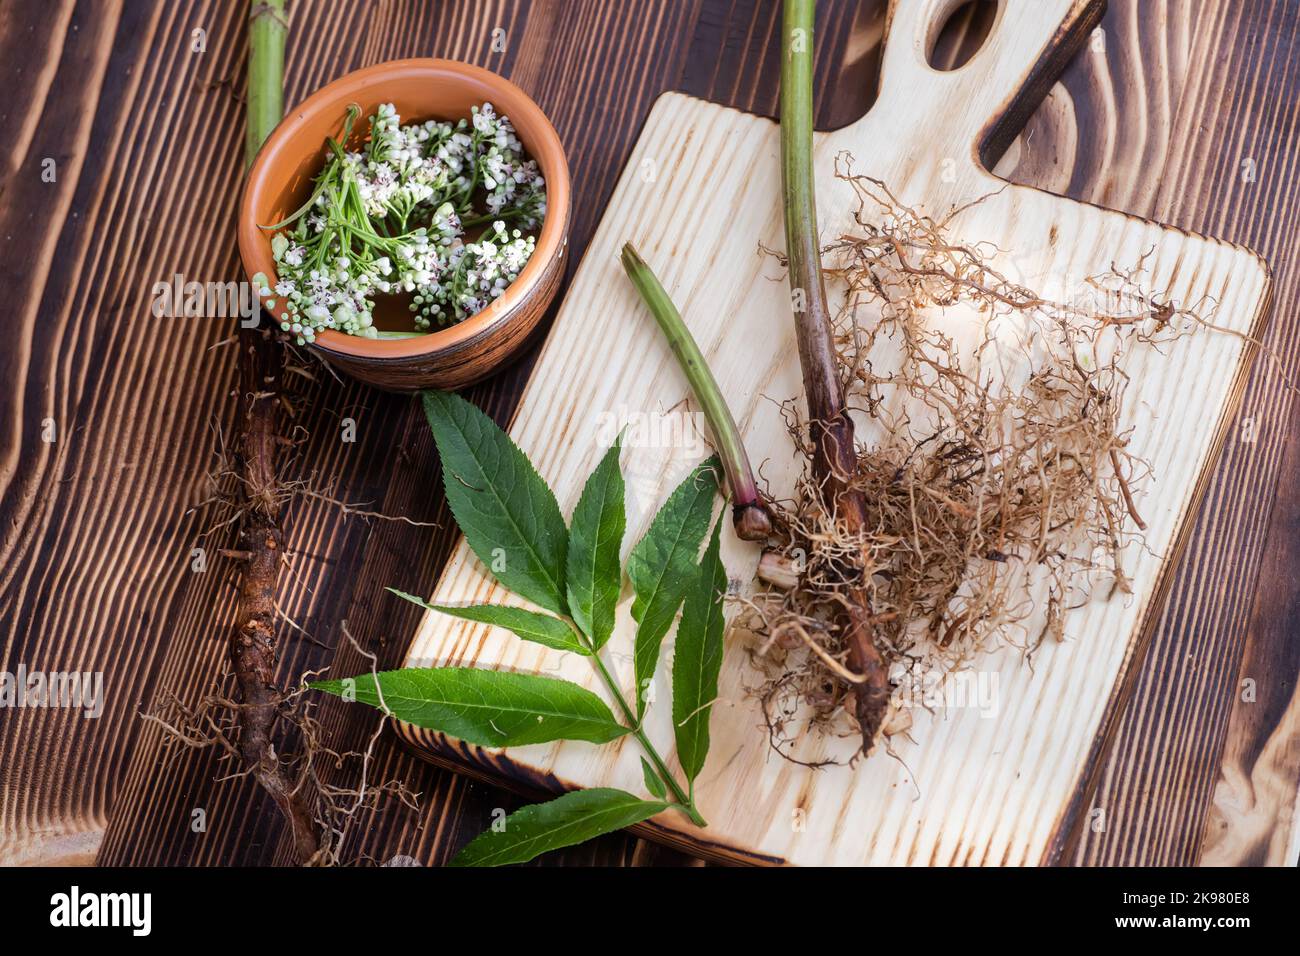 Valeriana roots, leaves and flowers close-up. Collection and harvesting of plant parts for use in traditional and alternative medicine as a sedative a Stock Photo